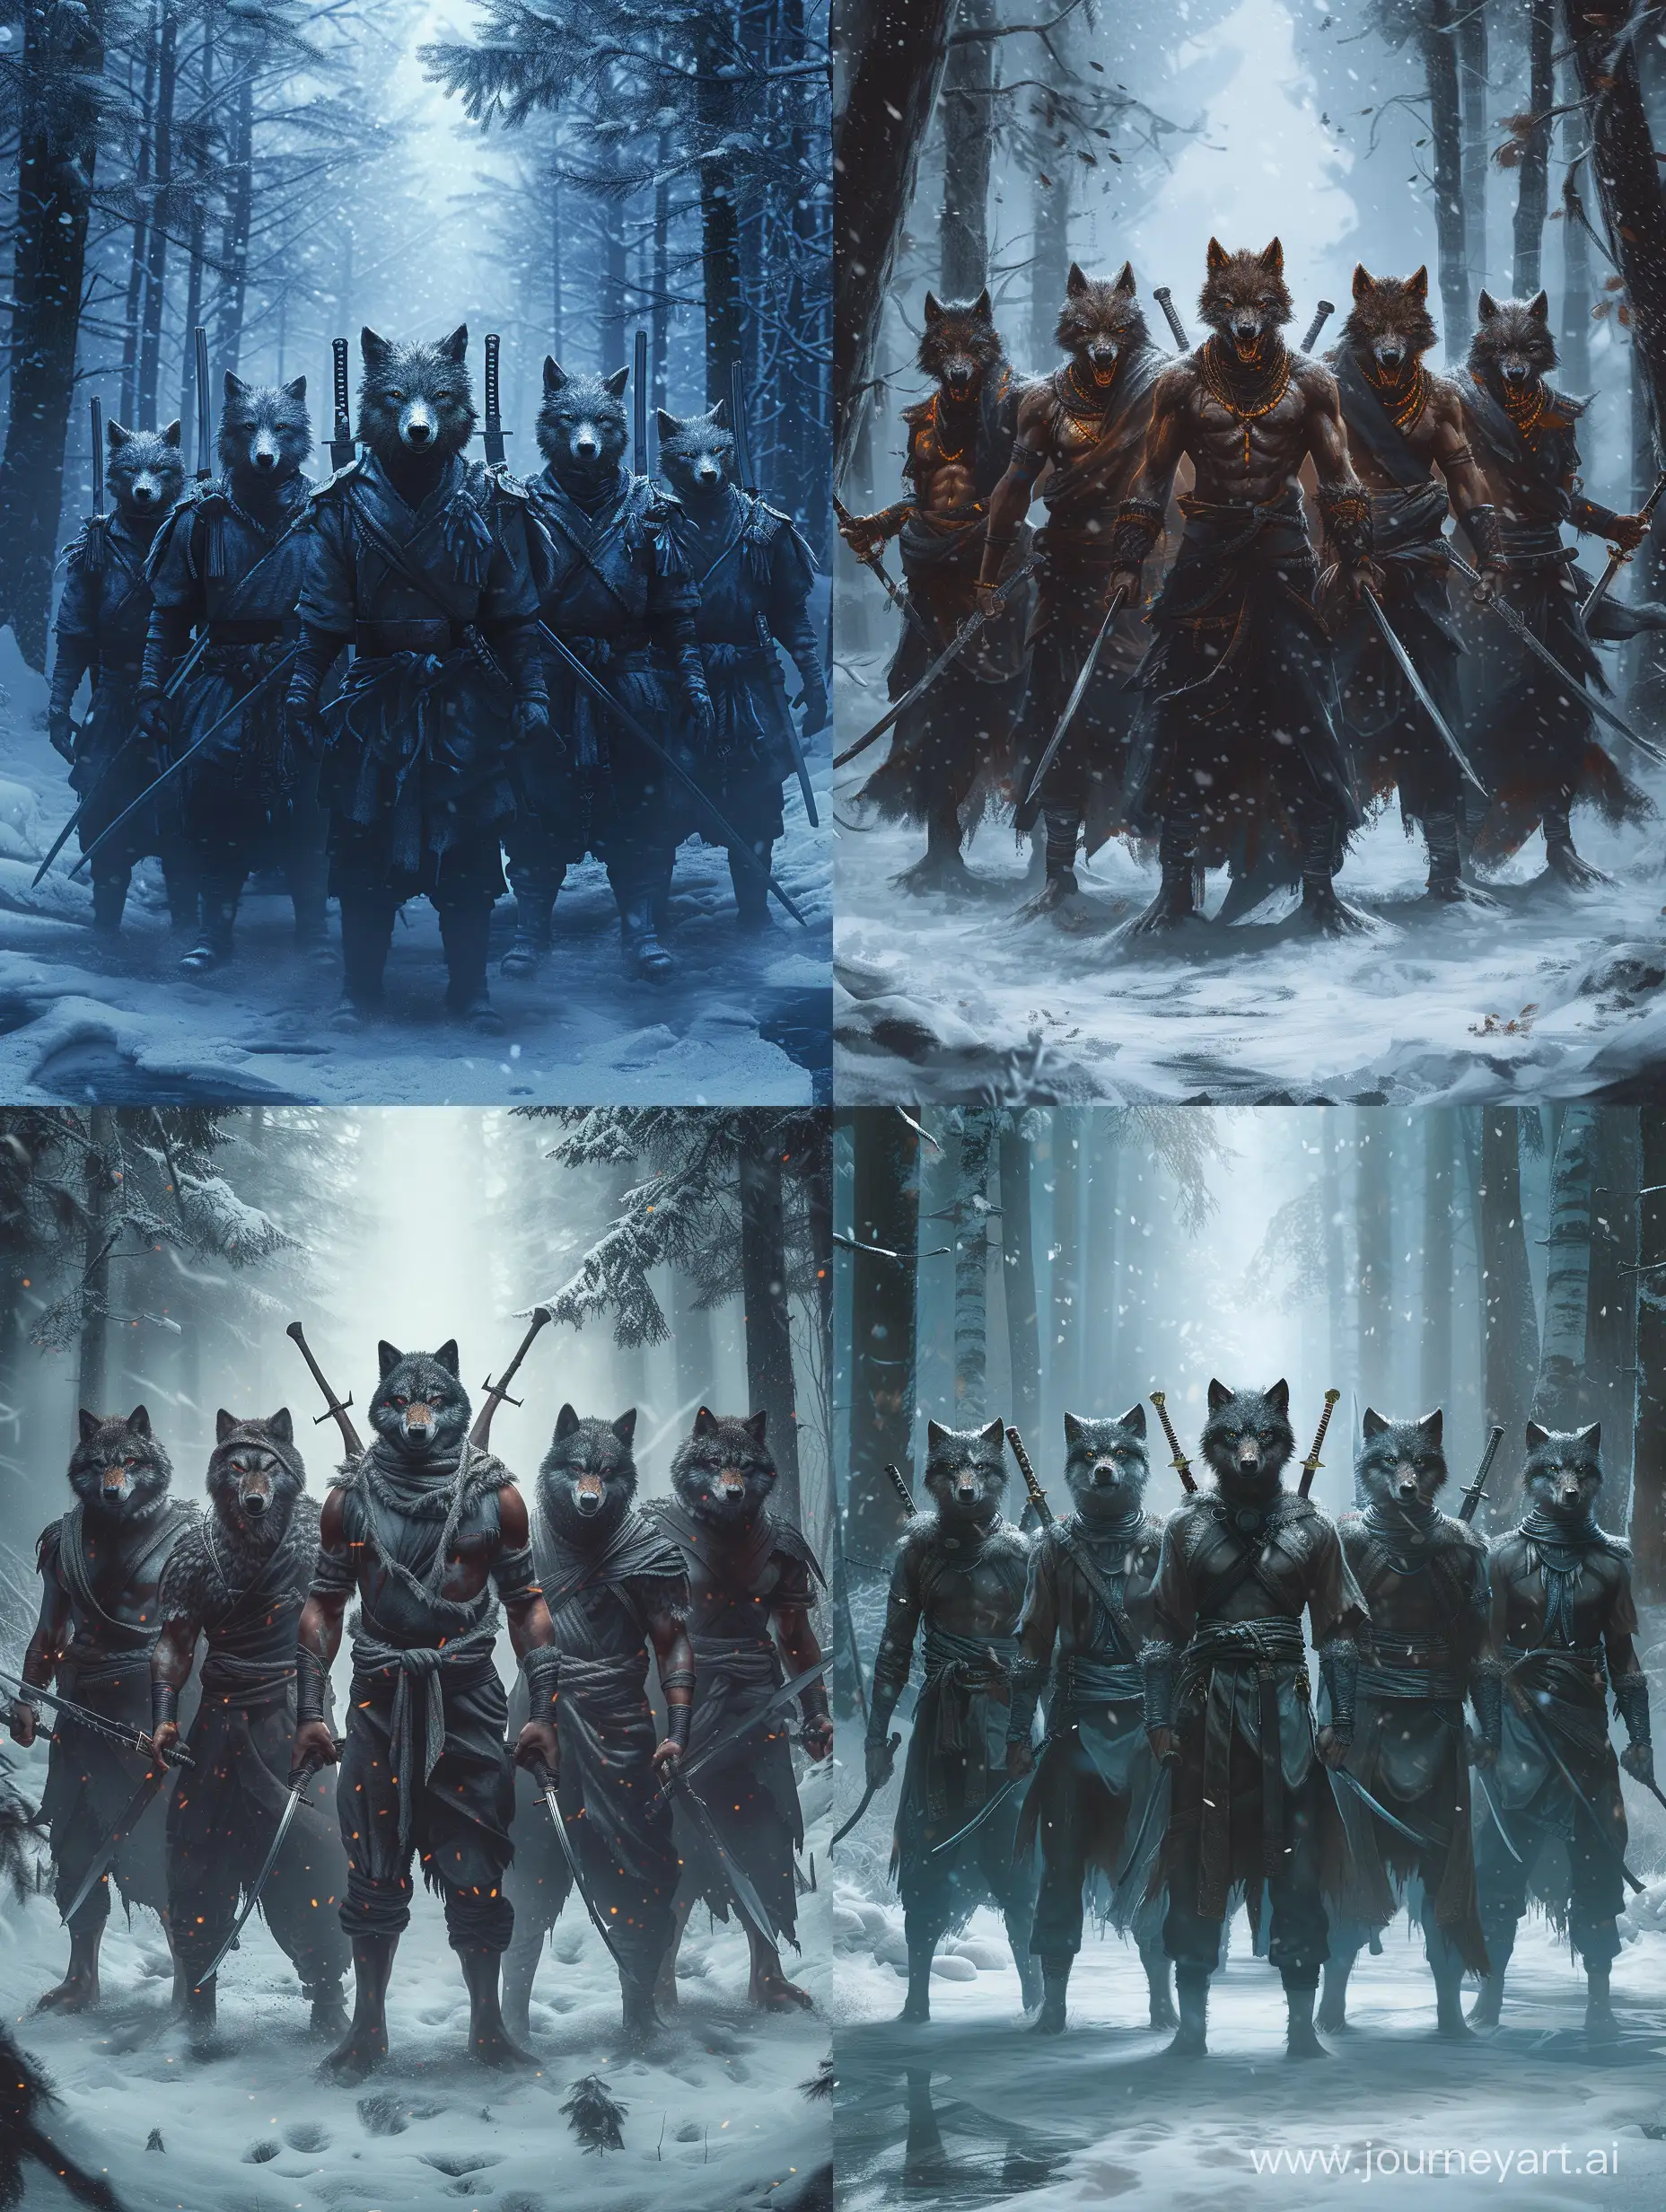 six warriors with wolf's head and human body,The leader of the wolves in the middle,two swords on his back,empty hands,in snowy forest,fierce,Detailed clothing.incredible detail,dark light,terrifying.